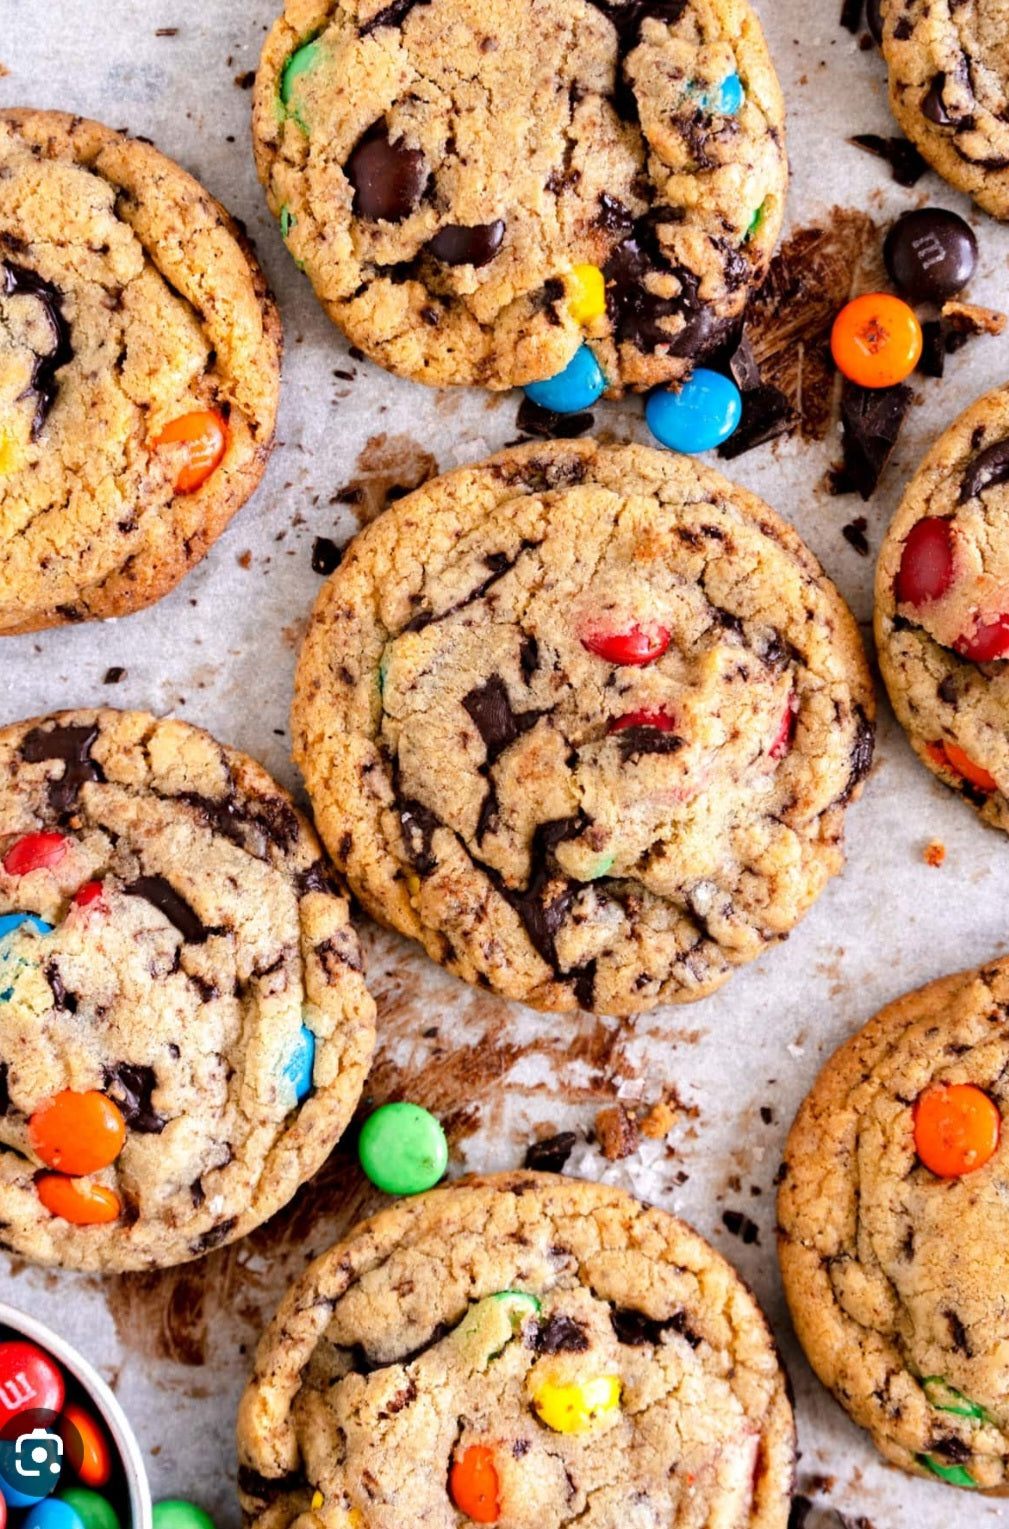 Chocolate Chip M&M Cookie Baking Class - Sunday, July 14th. 2pm-4pm.